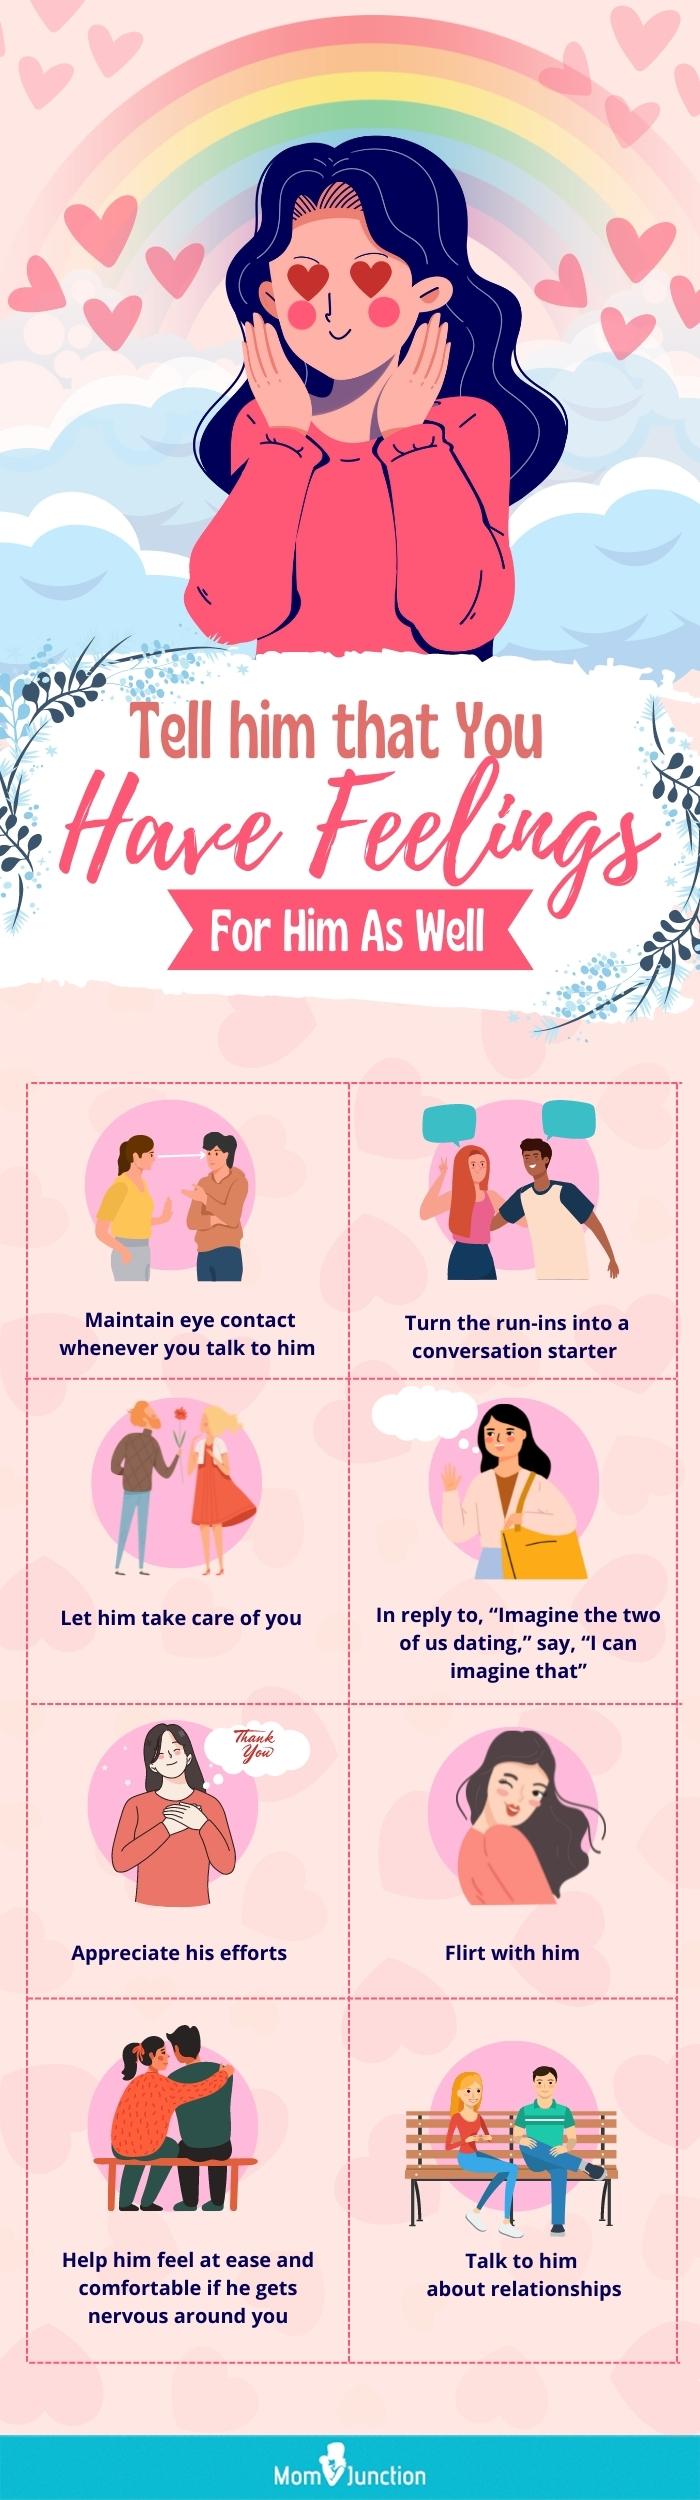 tell him that you have feelings for him as well (infographic)